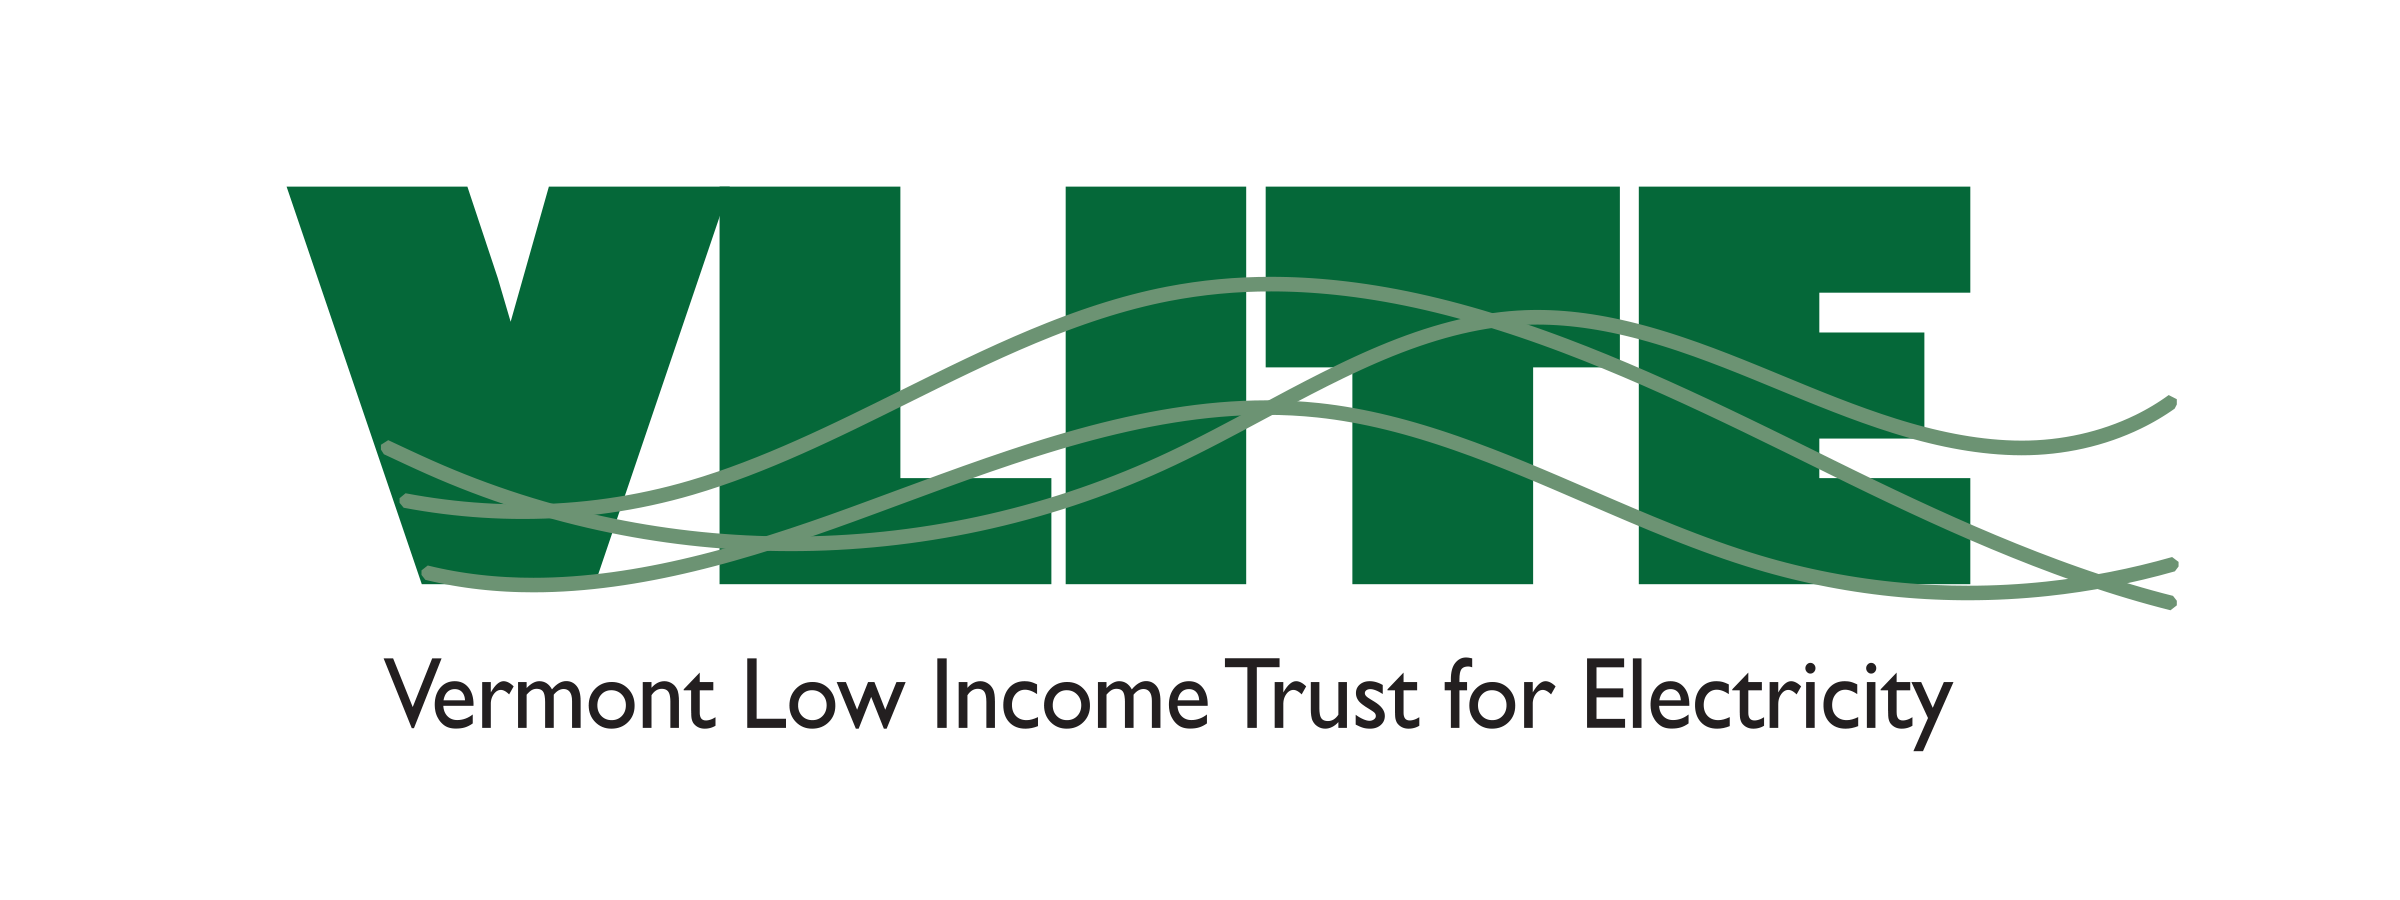 Vermont Low Income Trust for Electricity